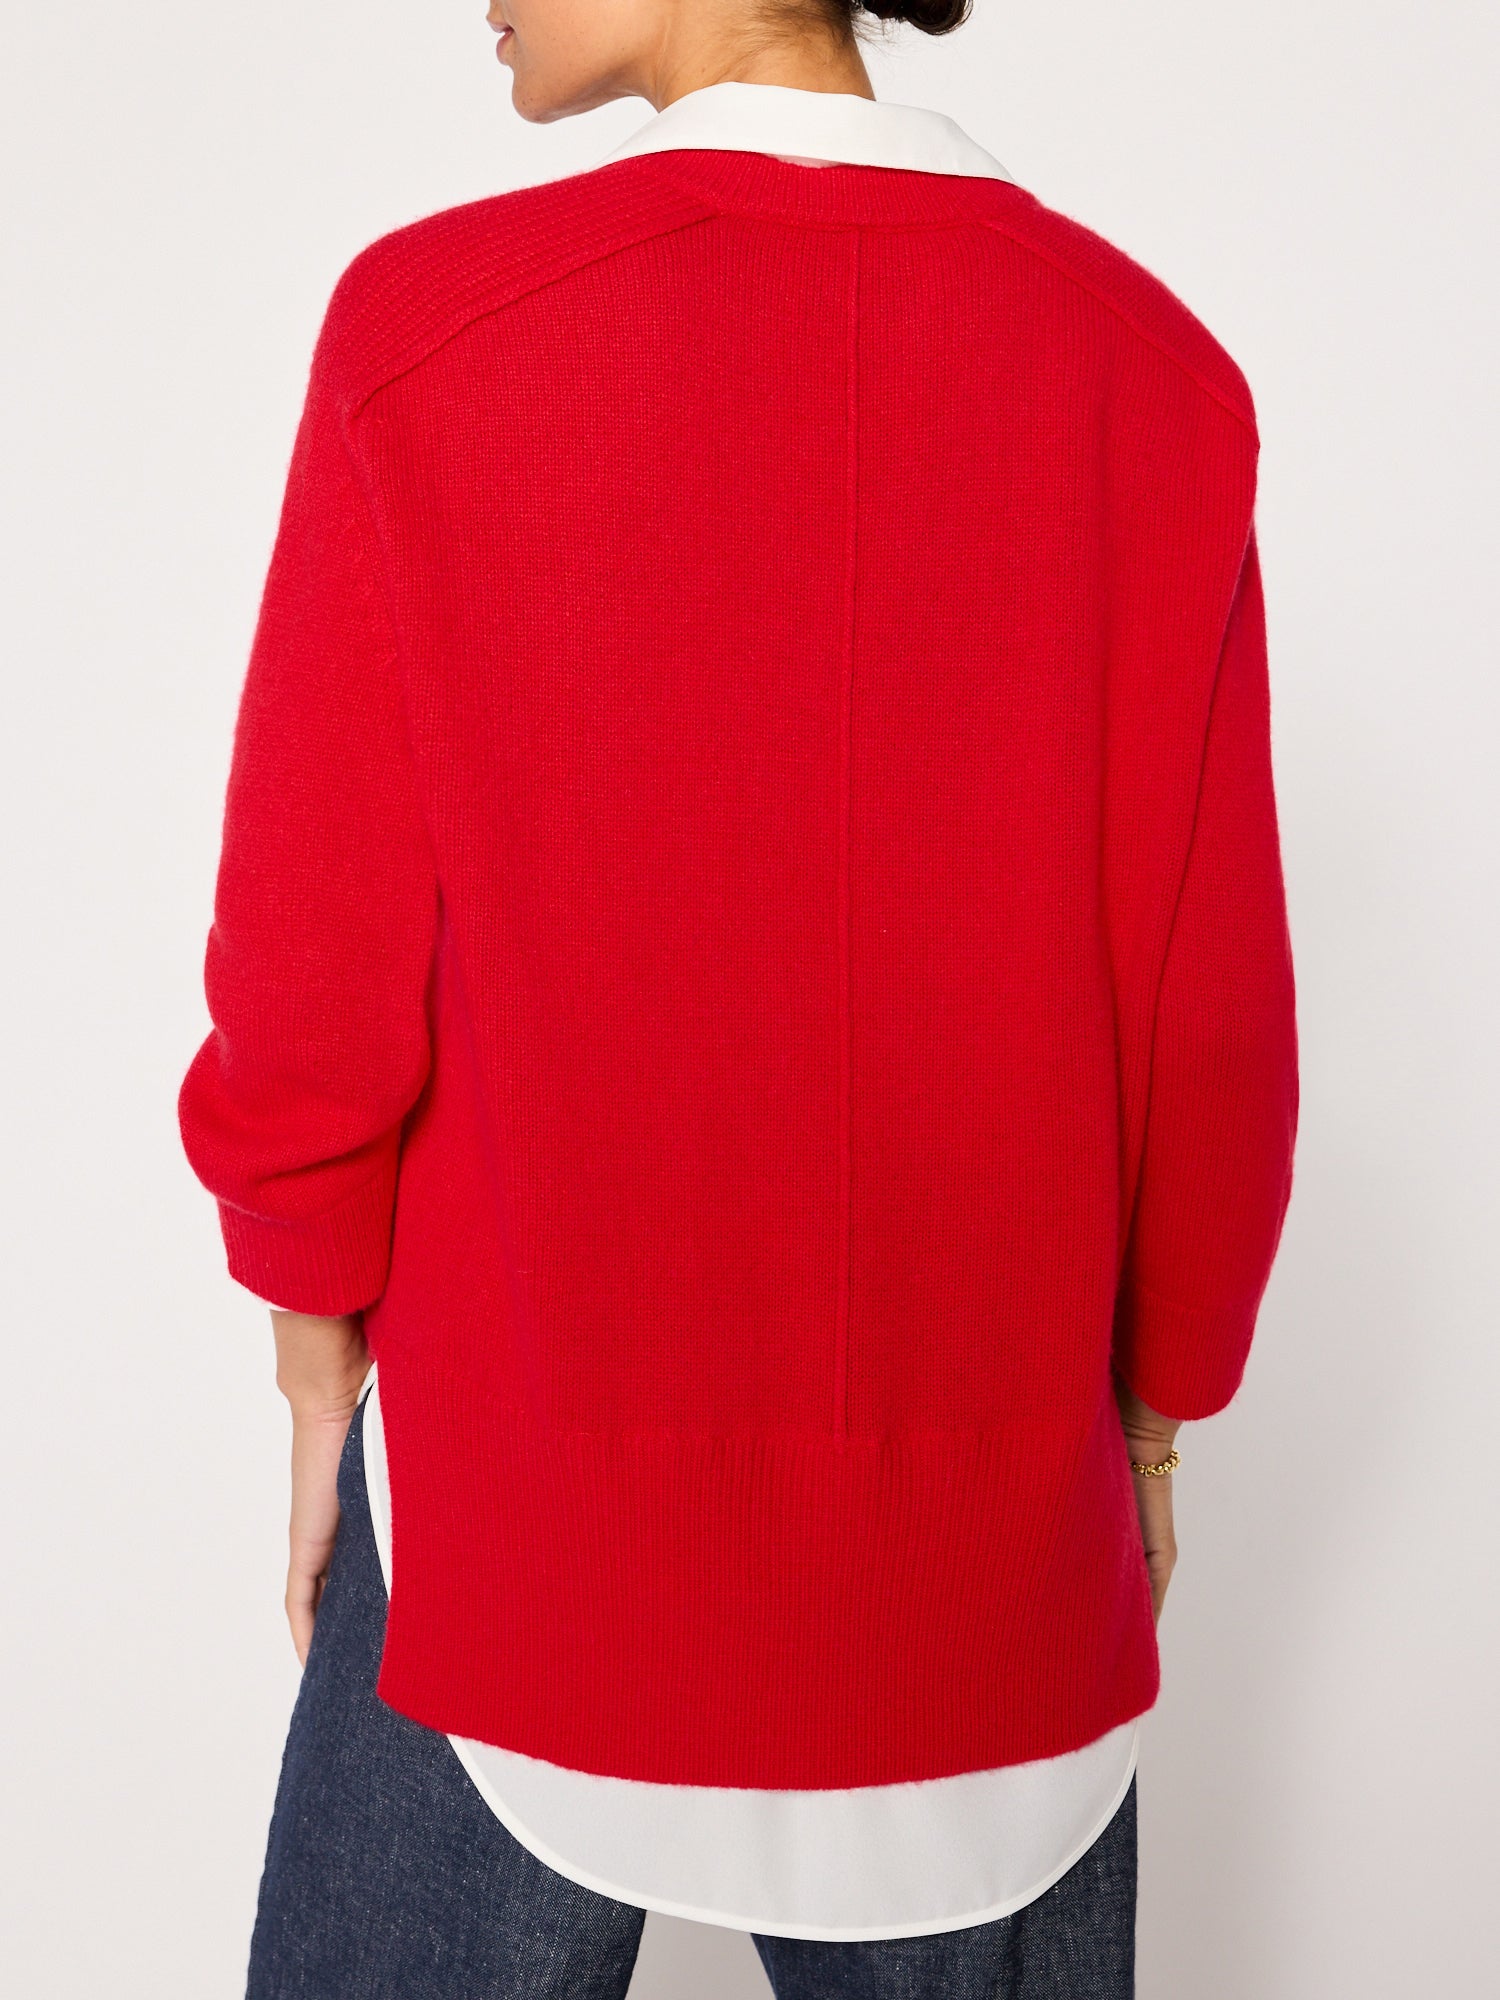 Looker red layered v-neck sweater back view